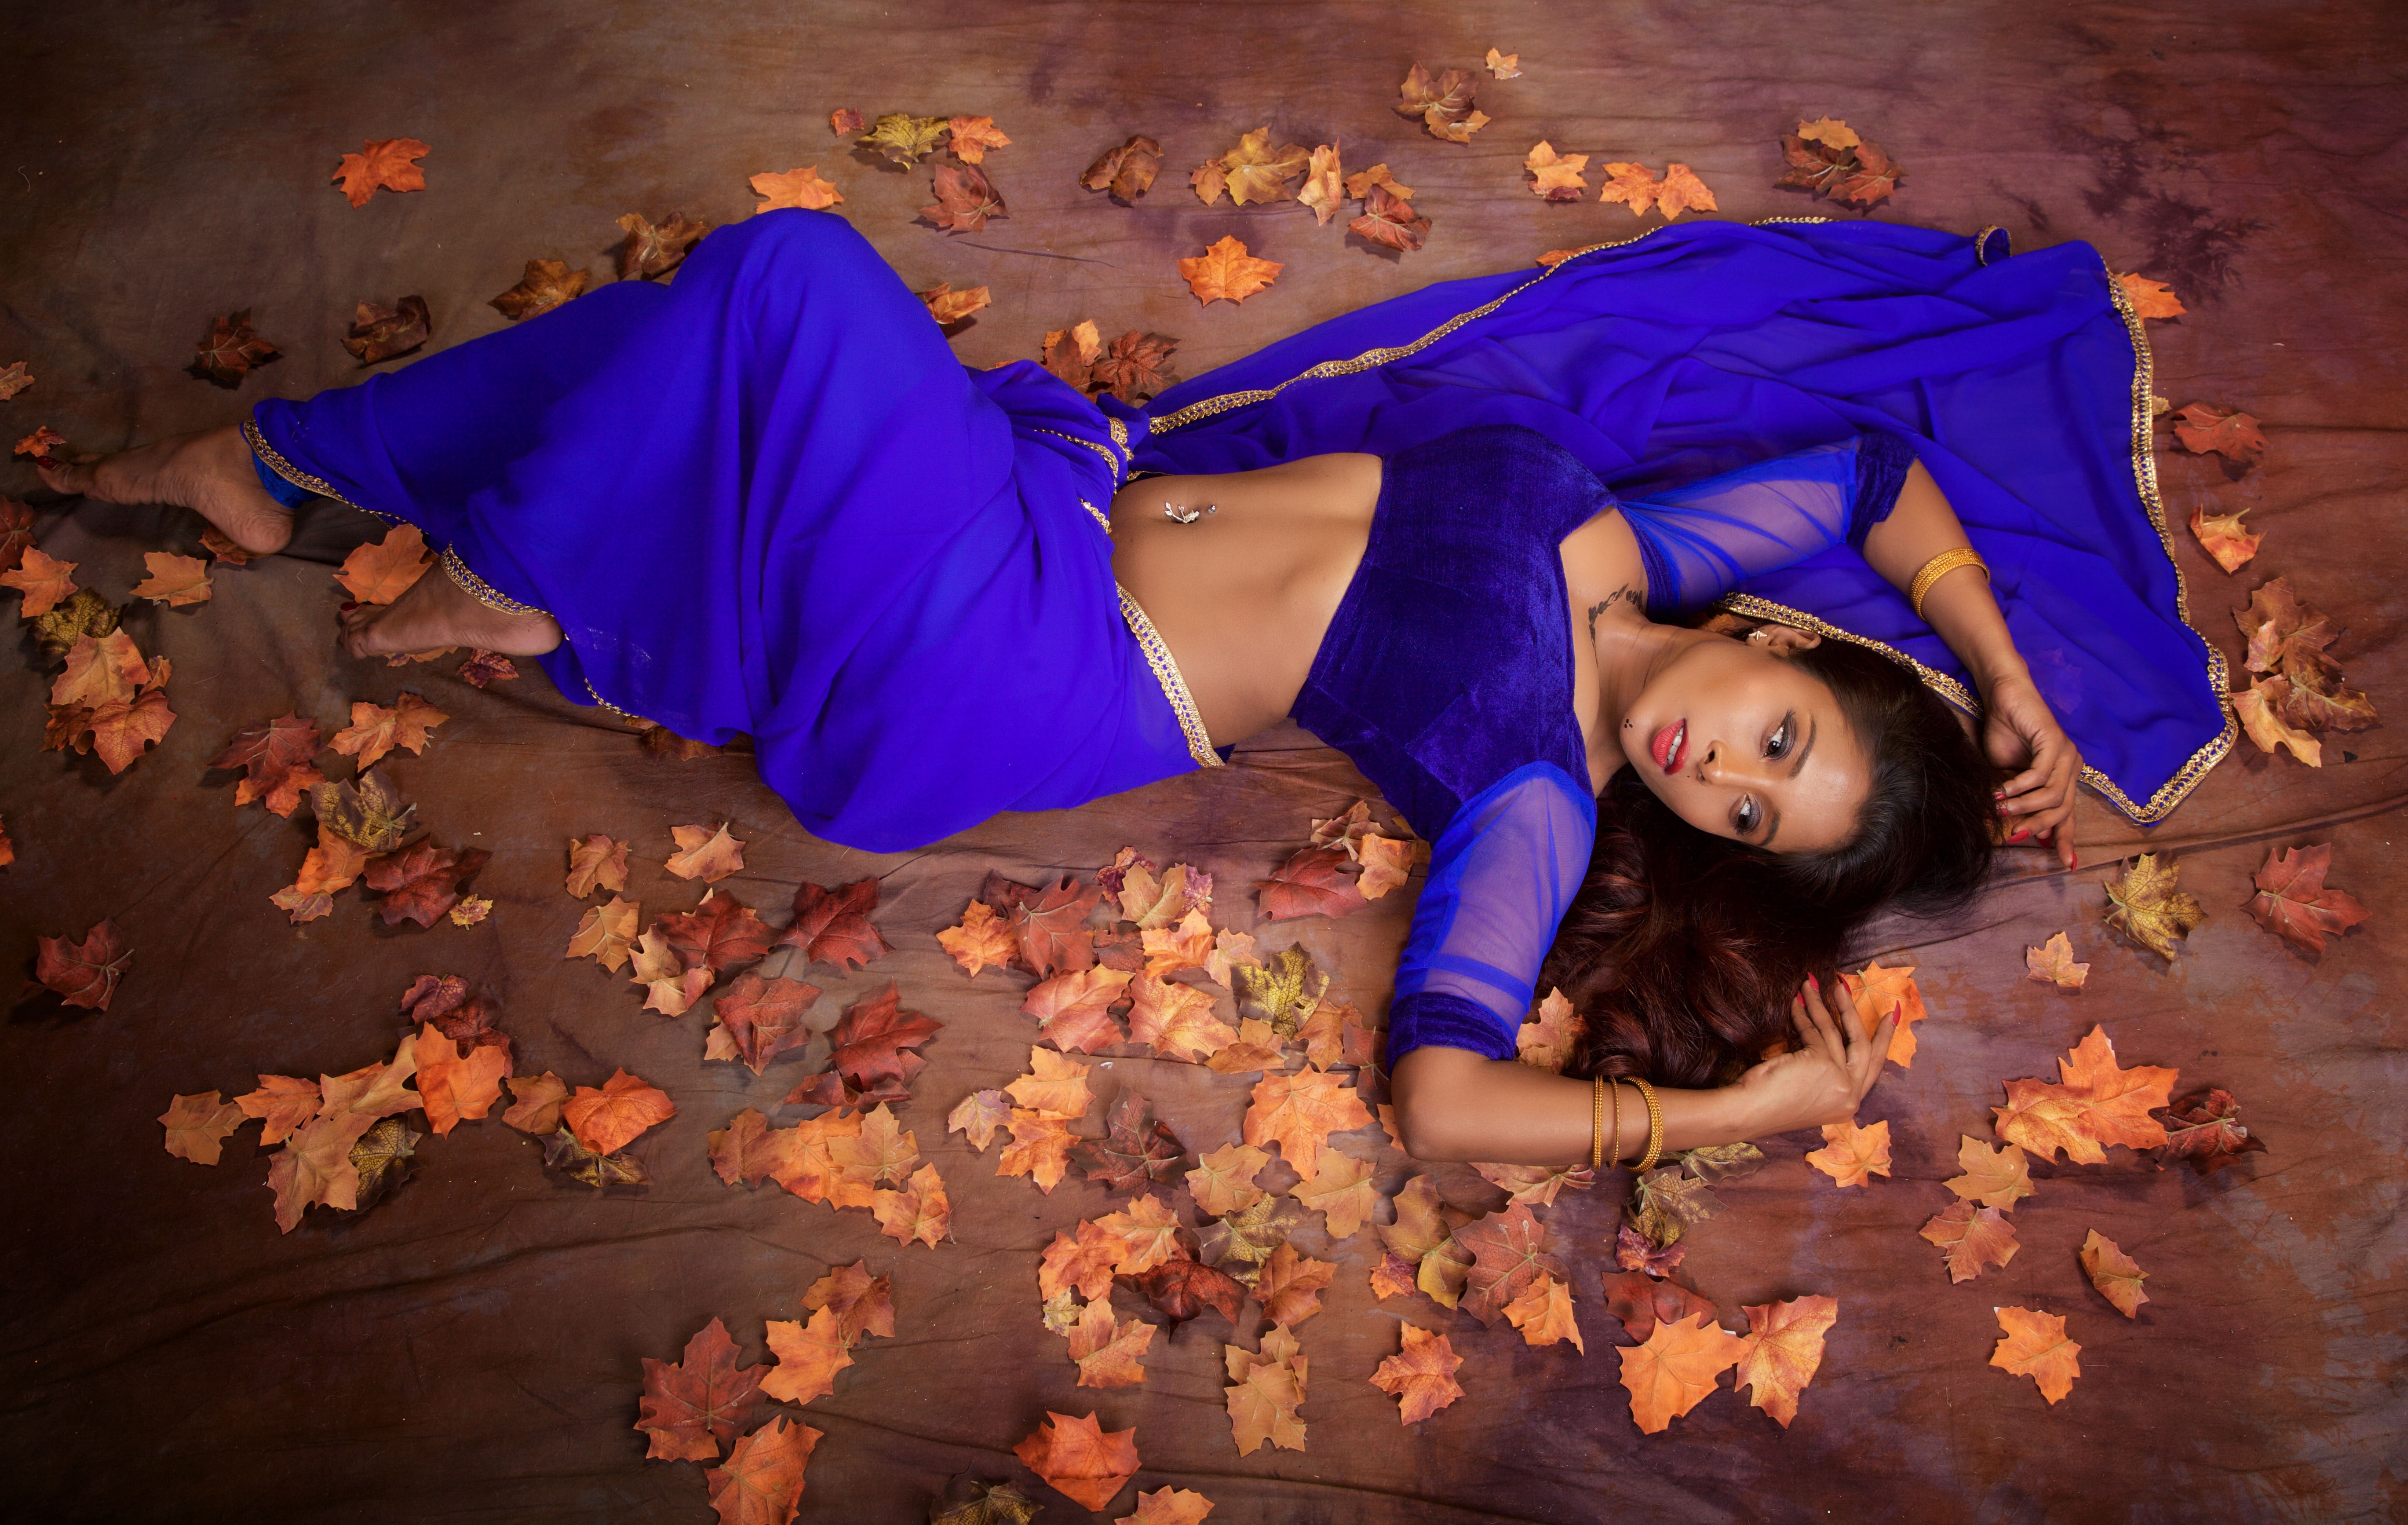 gokhale, nikita, lying down, one person, autumn, young adult